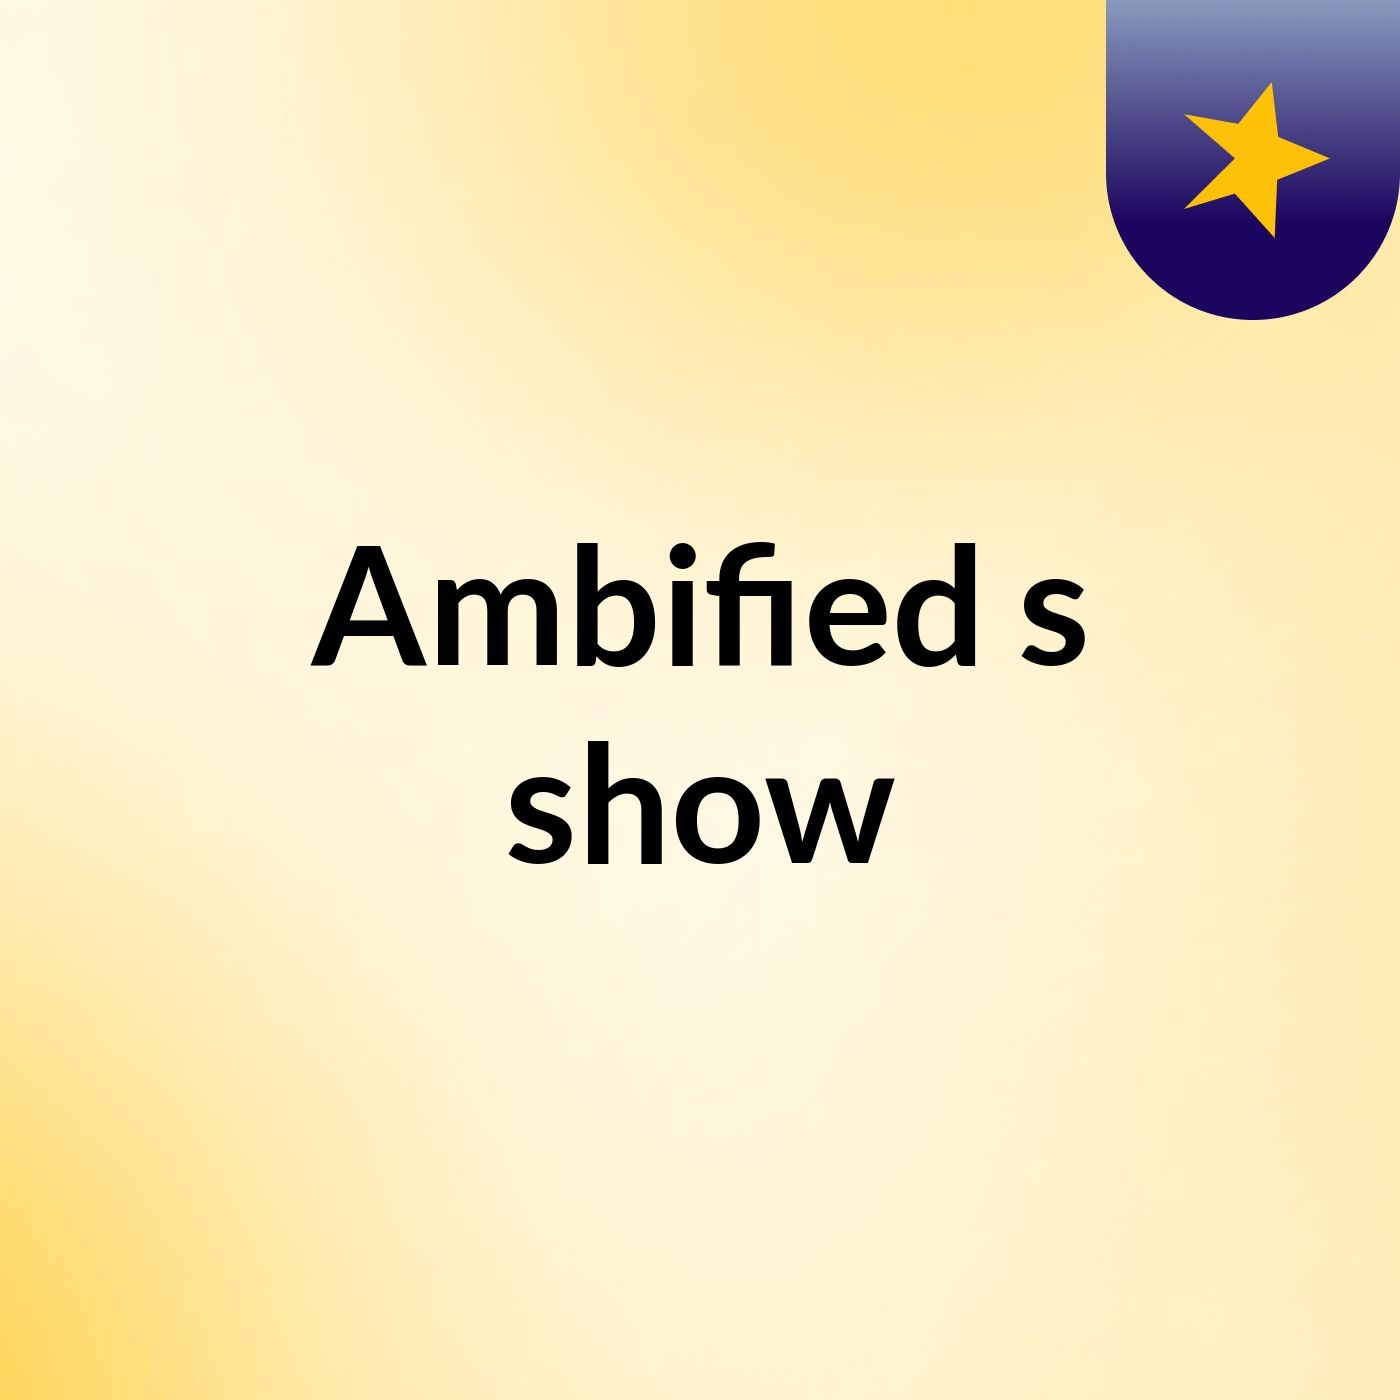 Ambified's show